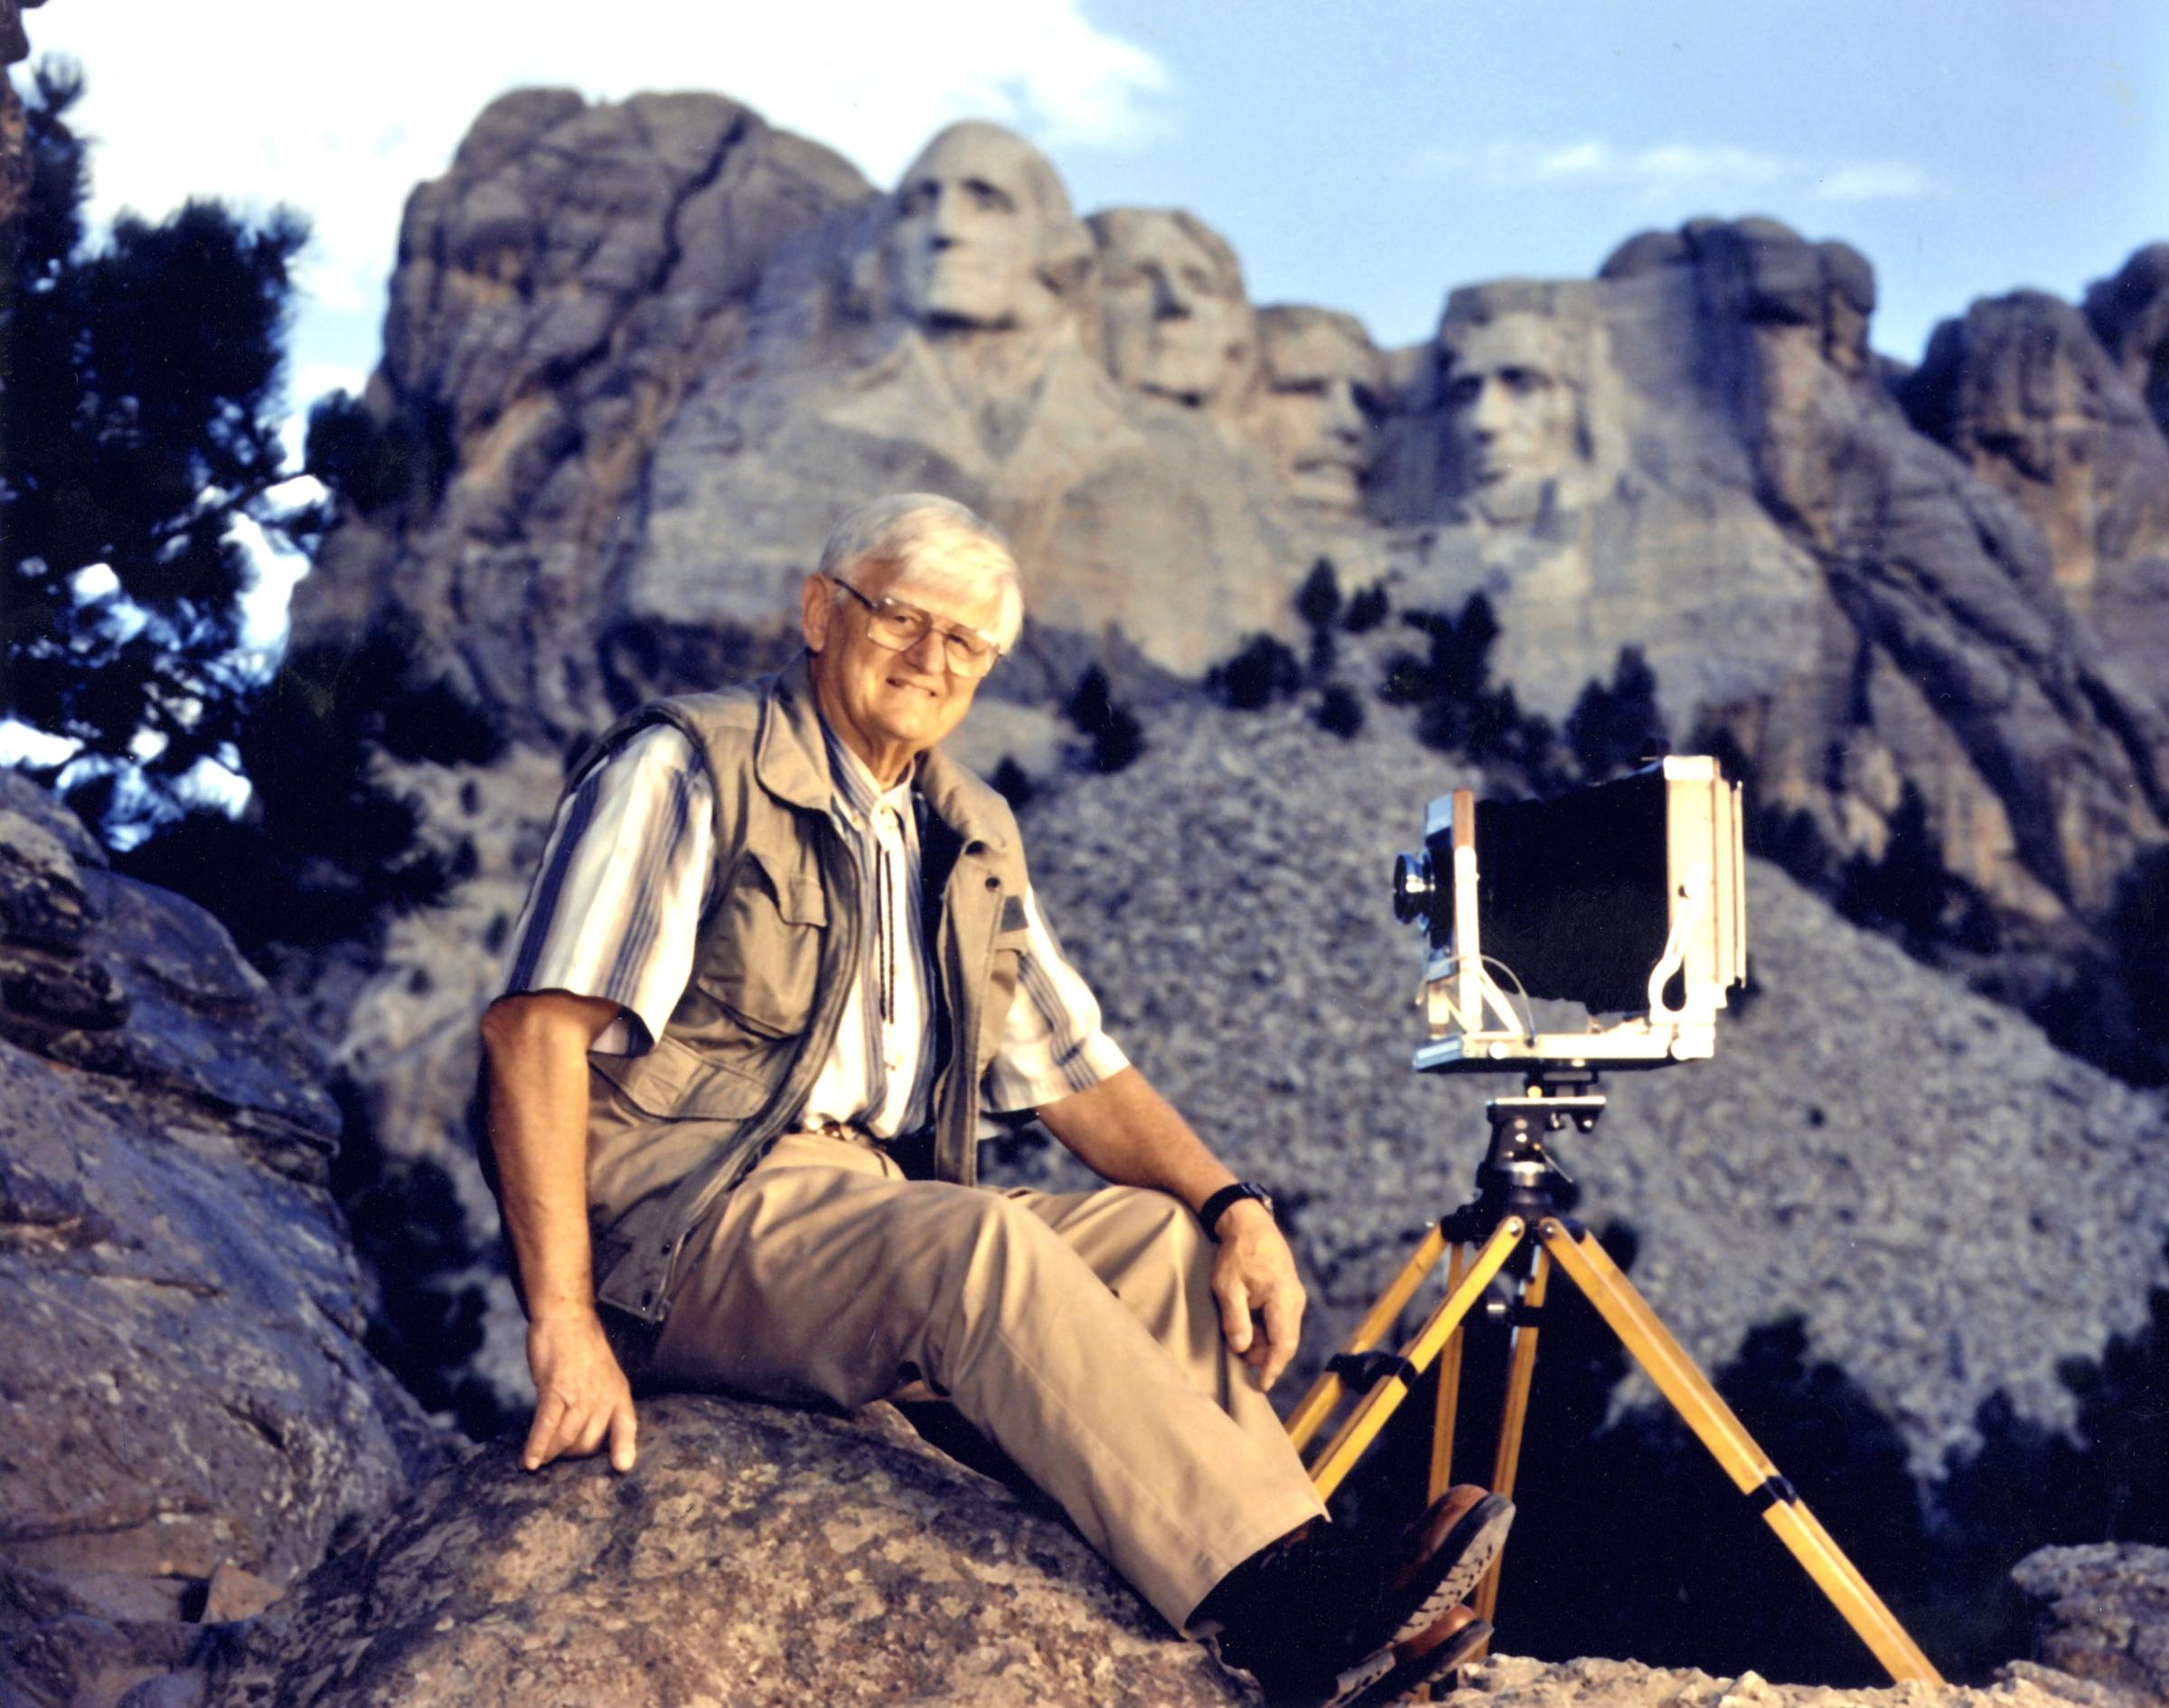 Bill Groethe with his 8x10 camera in front of Mount Rushmore, c. 1990s.